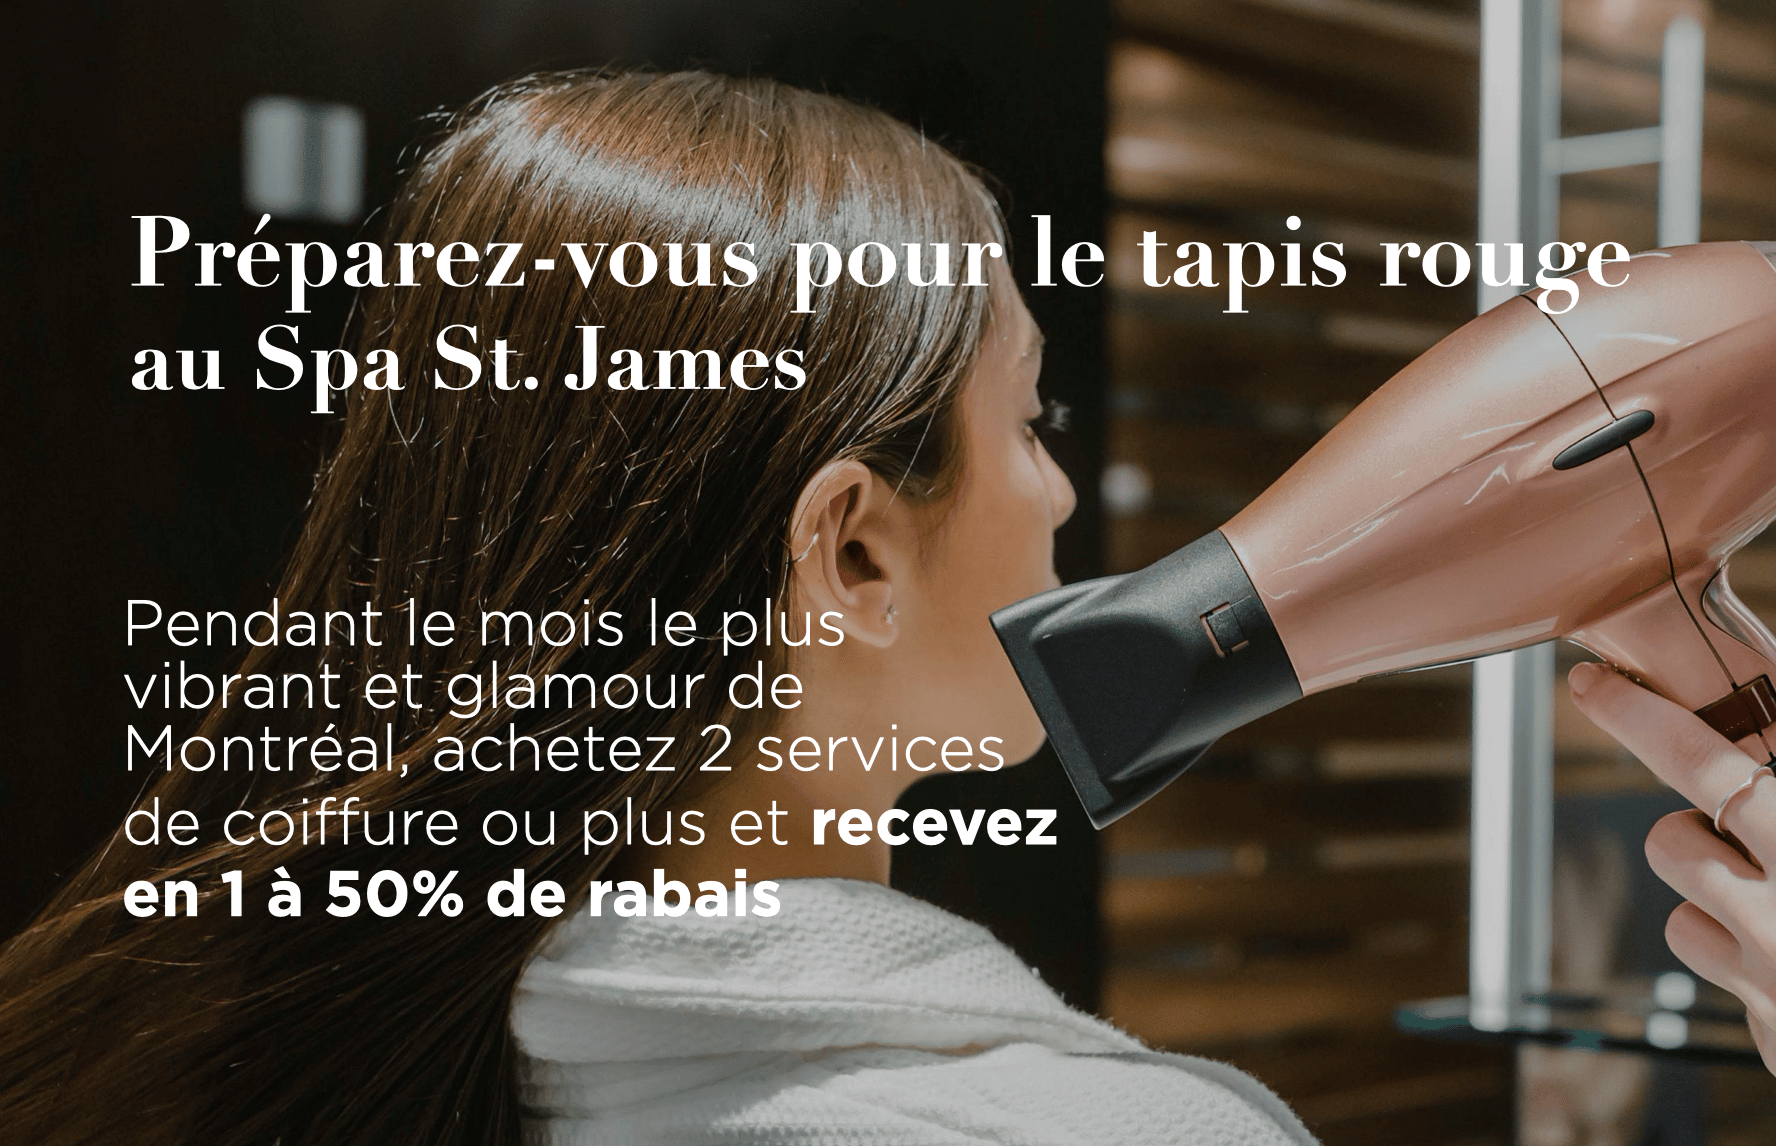 Promotions, Spa St. James